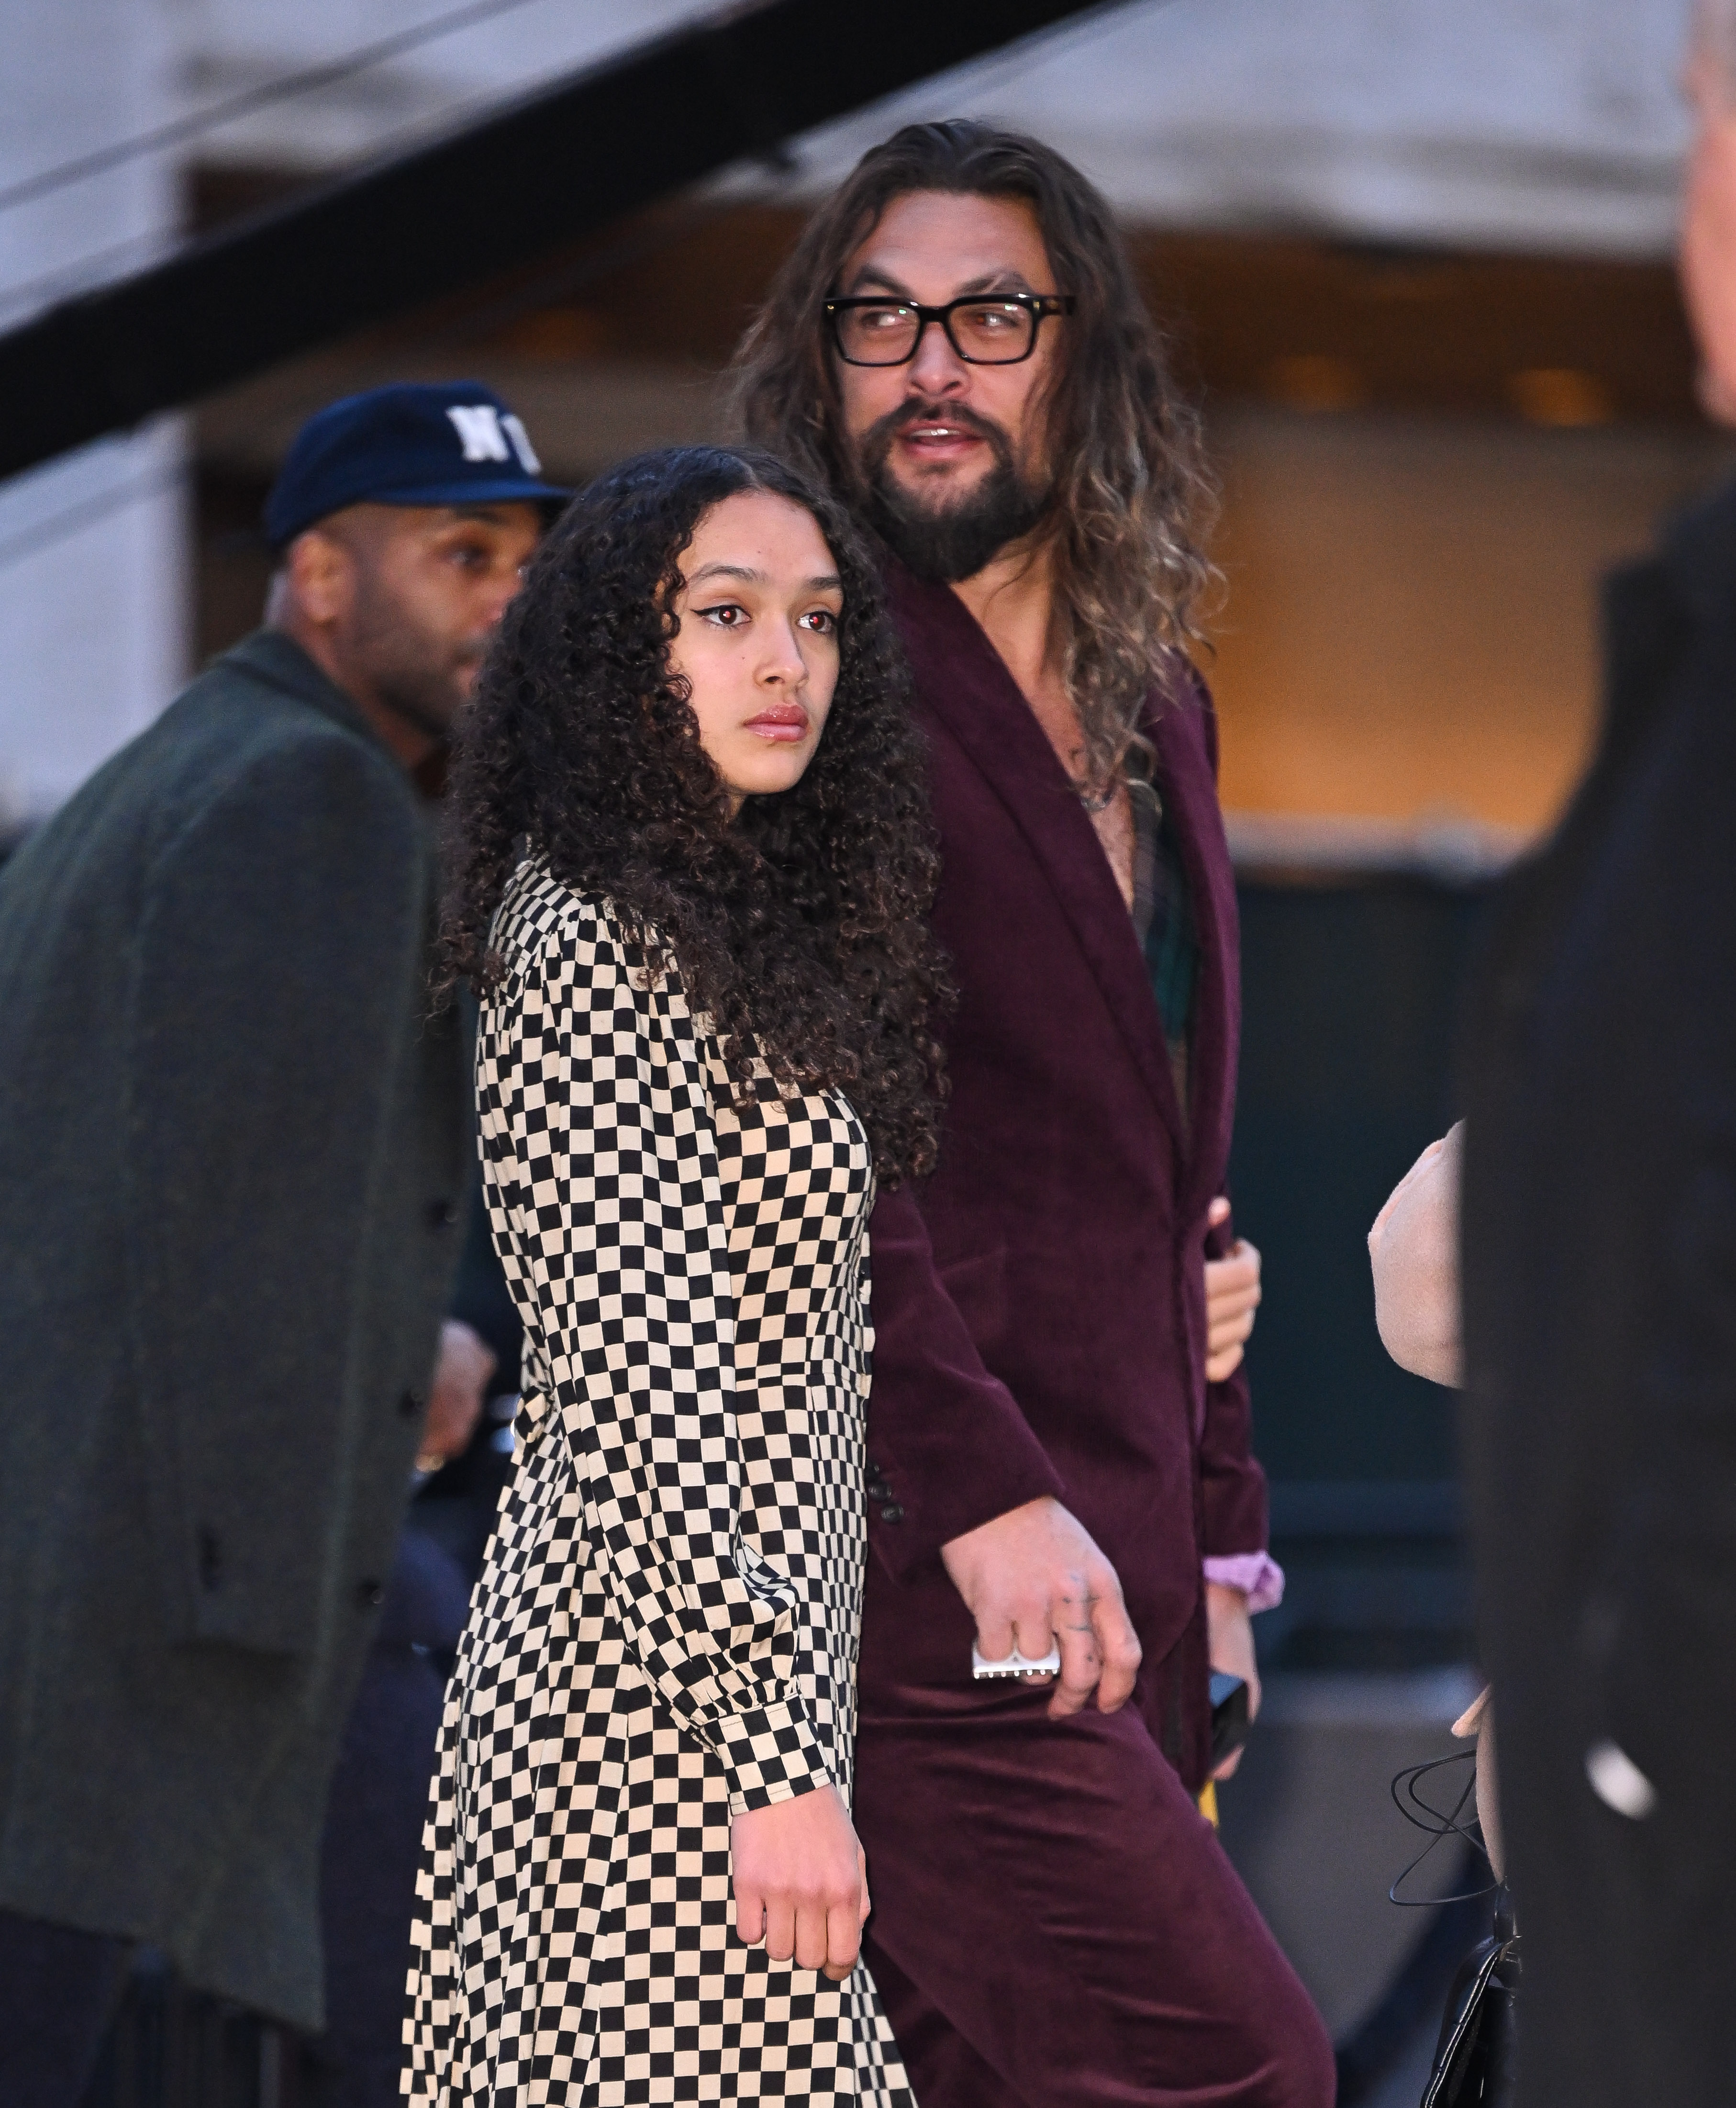 Lola lolani and Jason Momoa at the premiere of "The Batman" in New York City on March 1, 2022 | Source: Getty Images